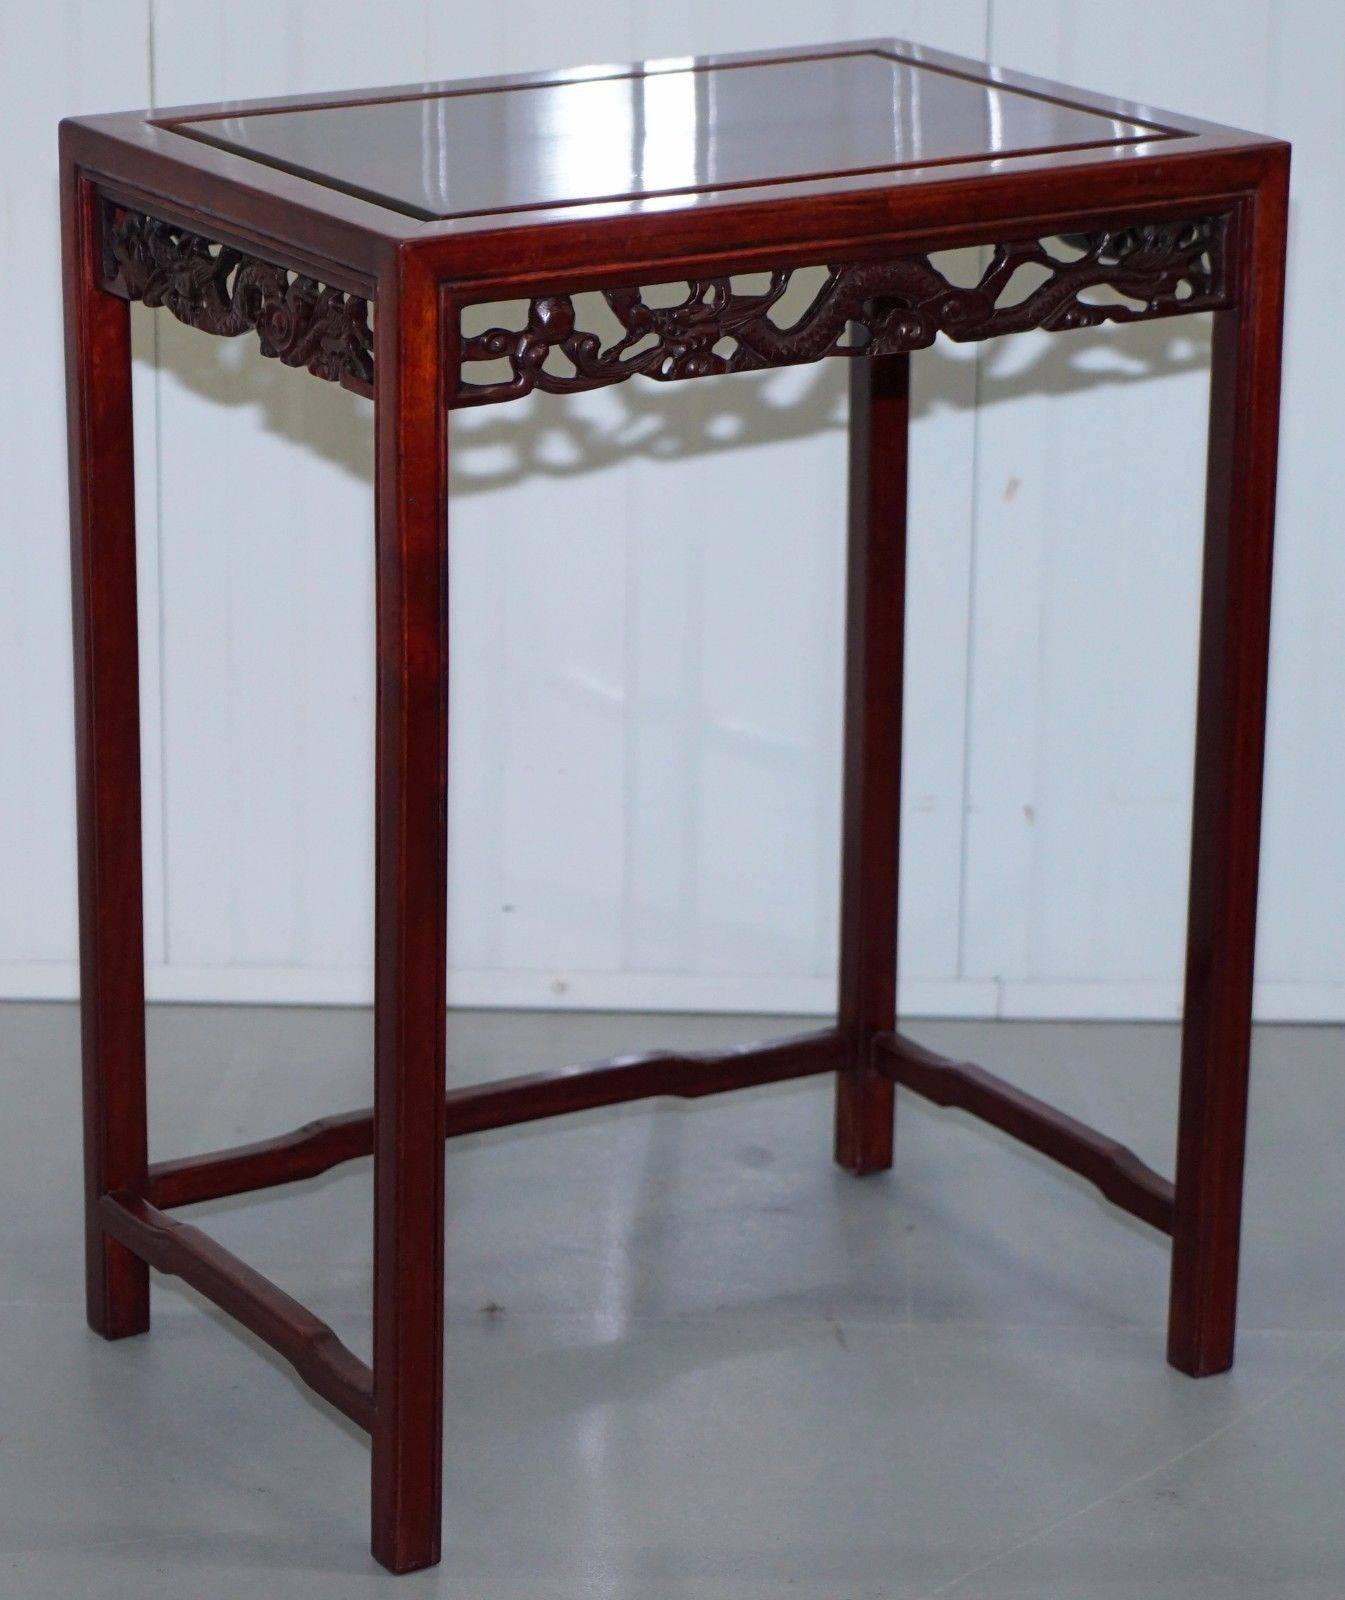 Stunning nest of four Chinese solid rosewood finely hand carved with Dragon detailing nest of tables

These tables retail for £2500-£3500 with all good dealers, these are just about as fine an example as you will see anywhere

A lovely decorative